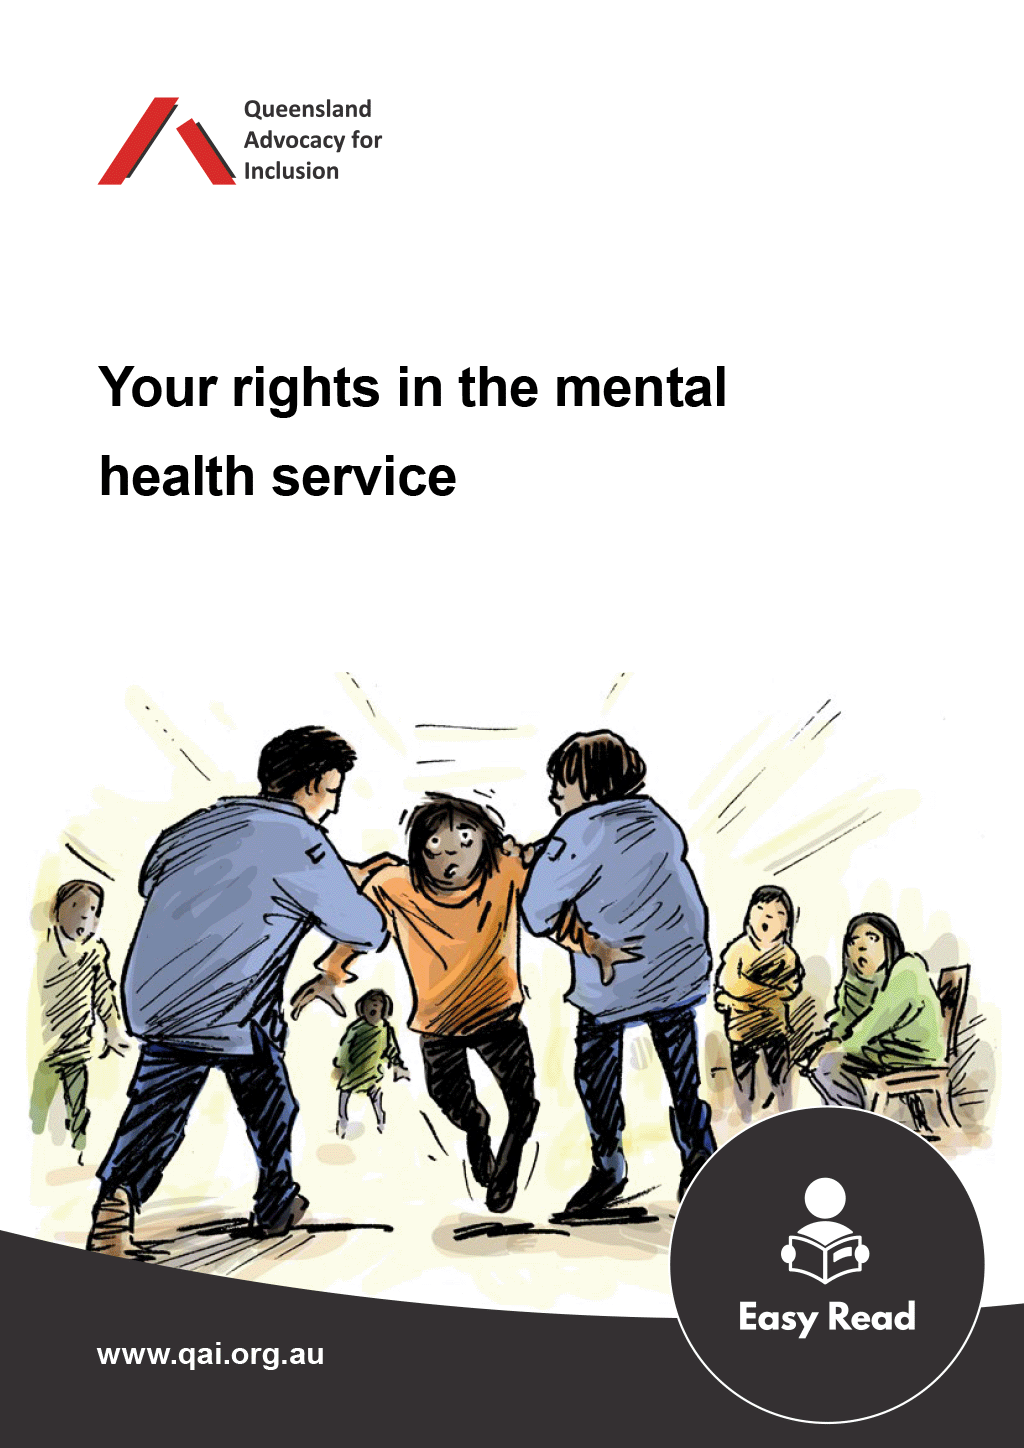 Checklist cover page with QAI logo, title "Your rights in the mental health service" with an illustration of a scared person being grabbed under the arms by 2 medical staff and dragged backwards with other patients watching in the background. Easy Read icon in the bottom corner.